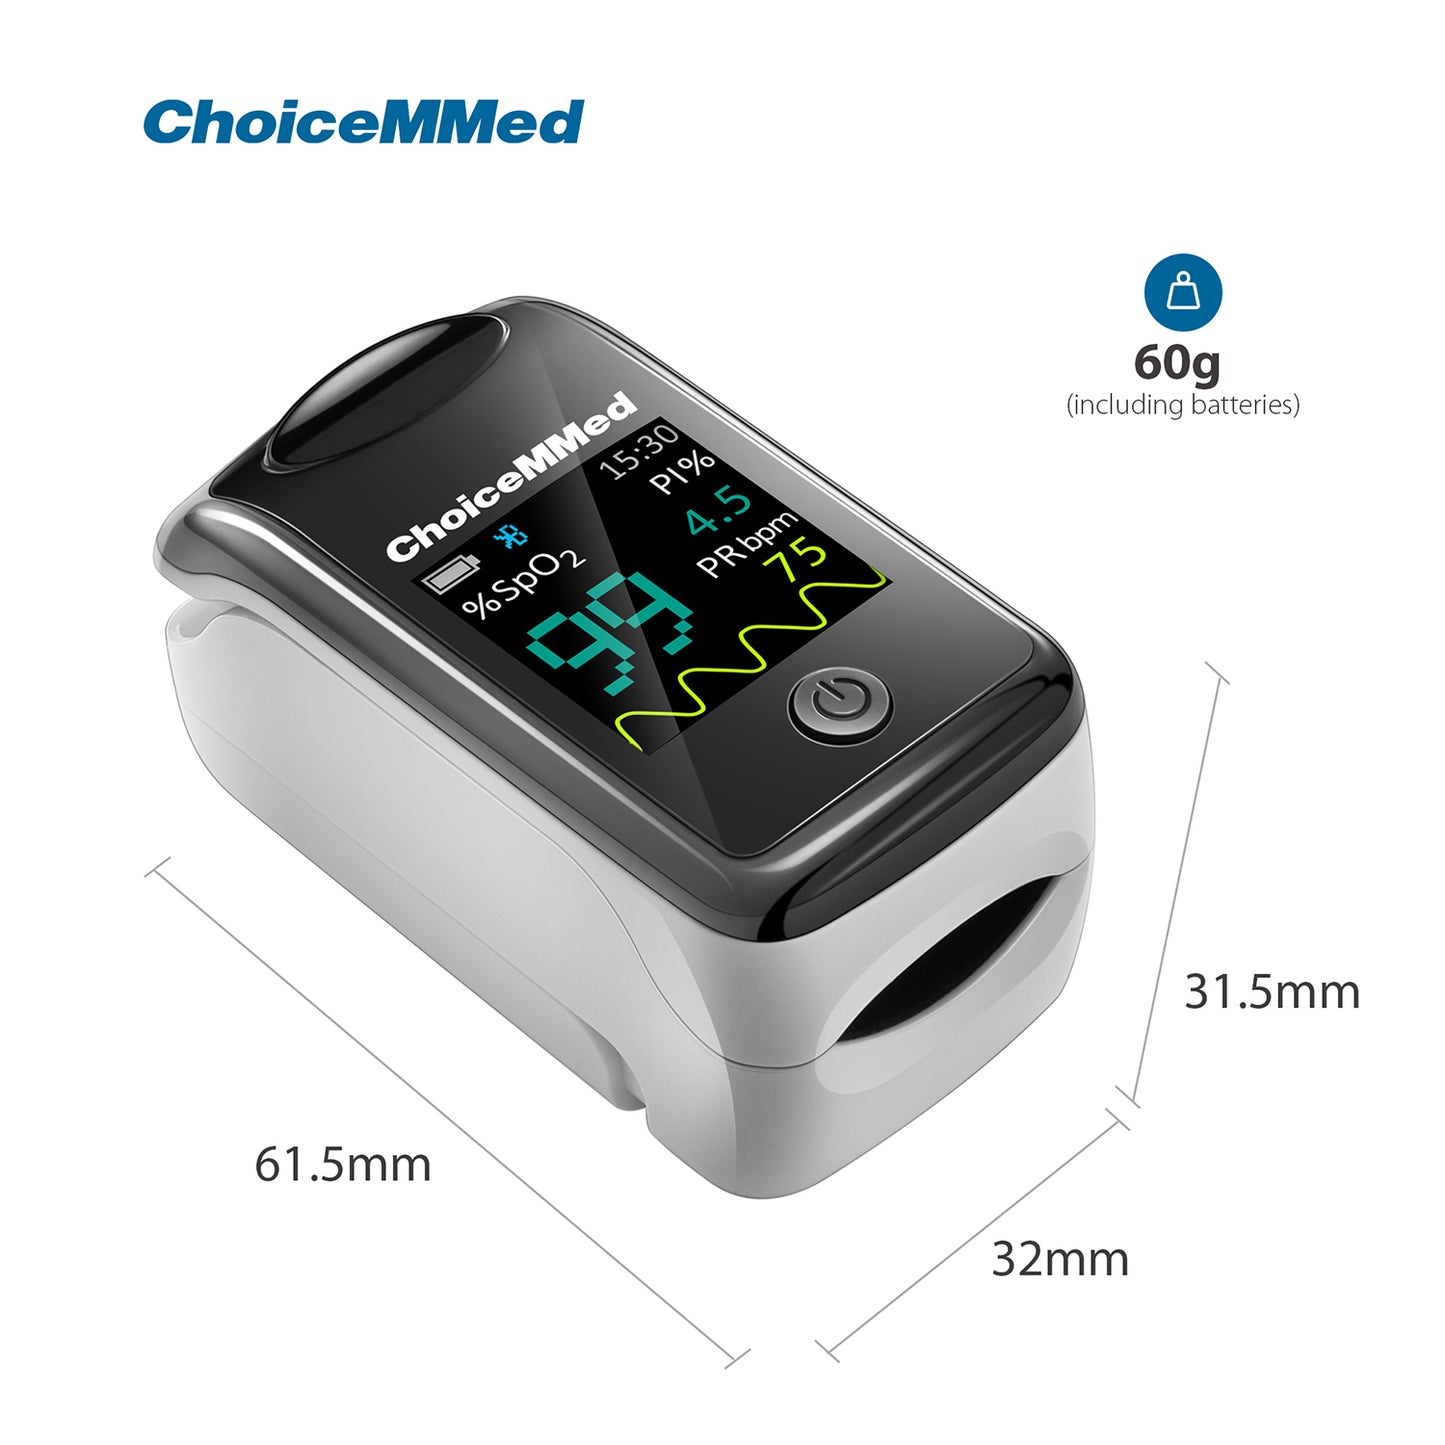 ChoiceMMed MD300CI218 OLED Medical Finger Pulse Oximeter With Bluetooth For Measuring Oxygen Saturation (SpO2)